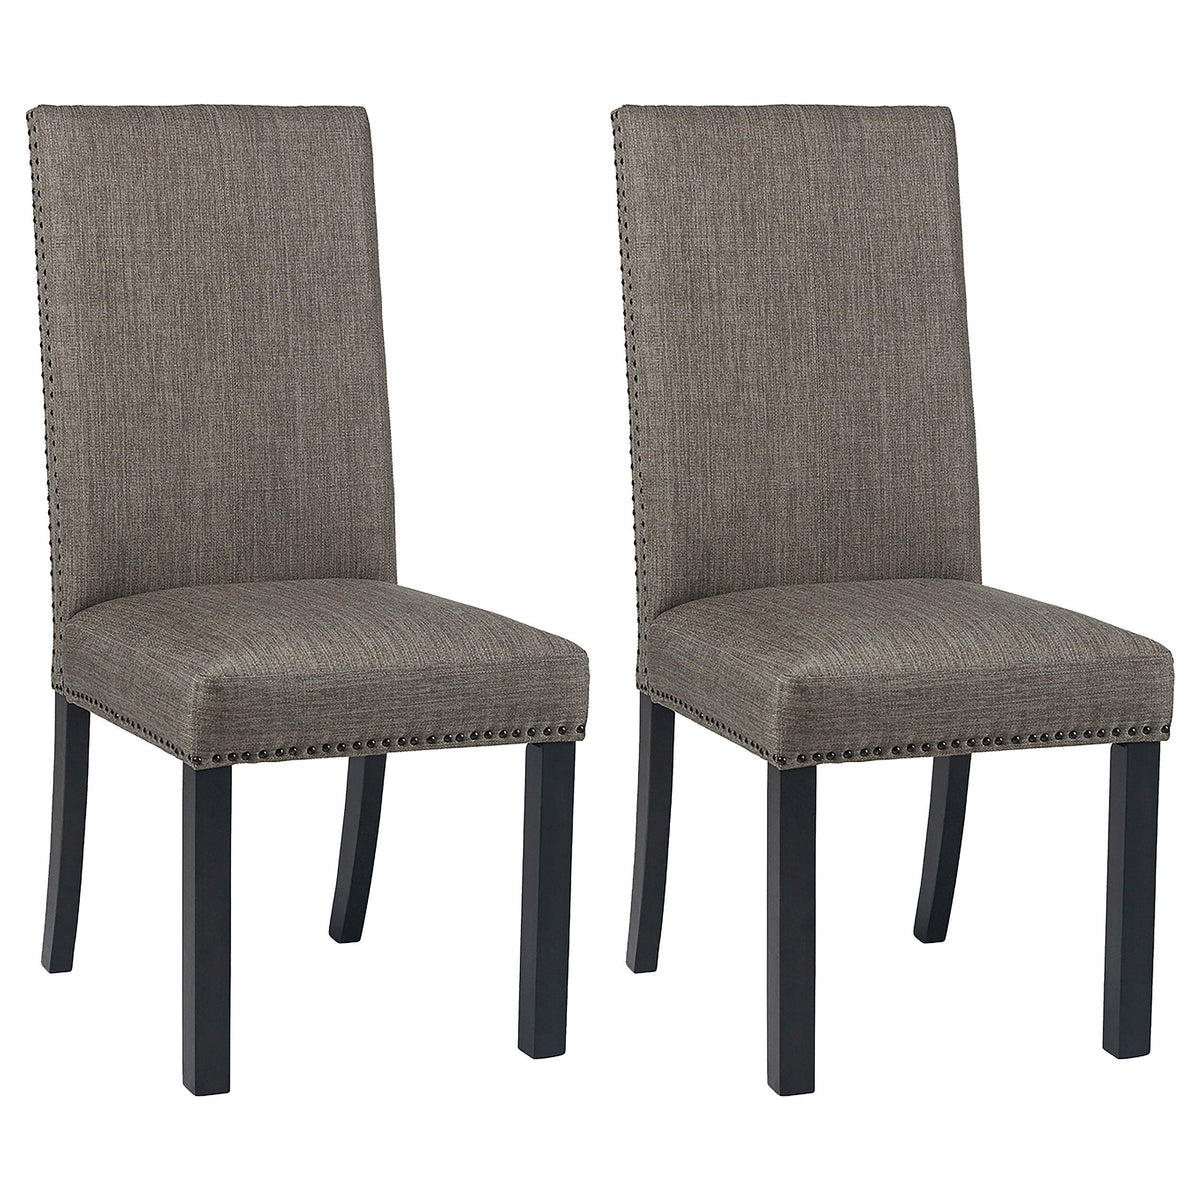 Hubbard Upholstered Side Chairs Charcoal (Set of 2) Hubbard Upholstered Side Chairs Charcoal (Set of 2) Half Price Furniture